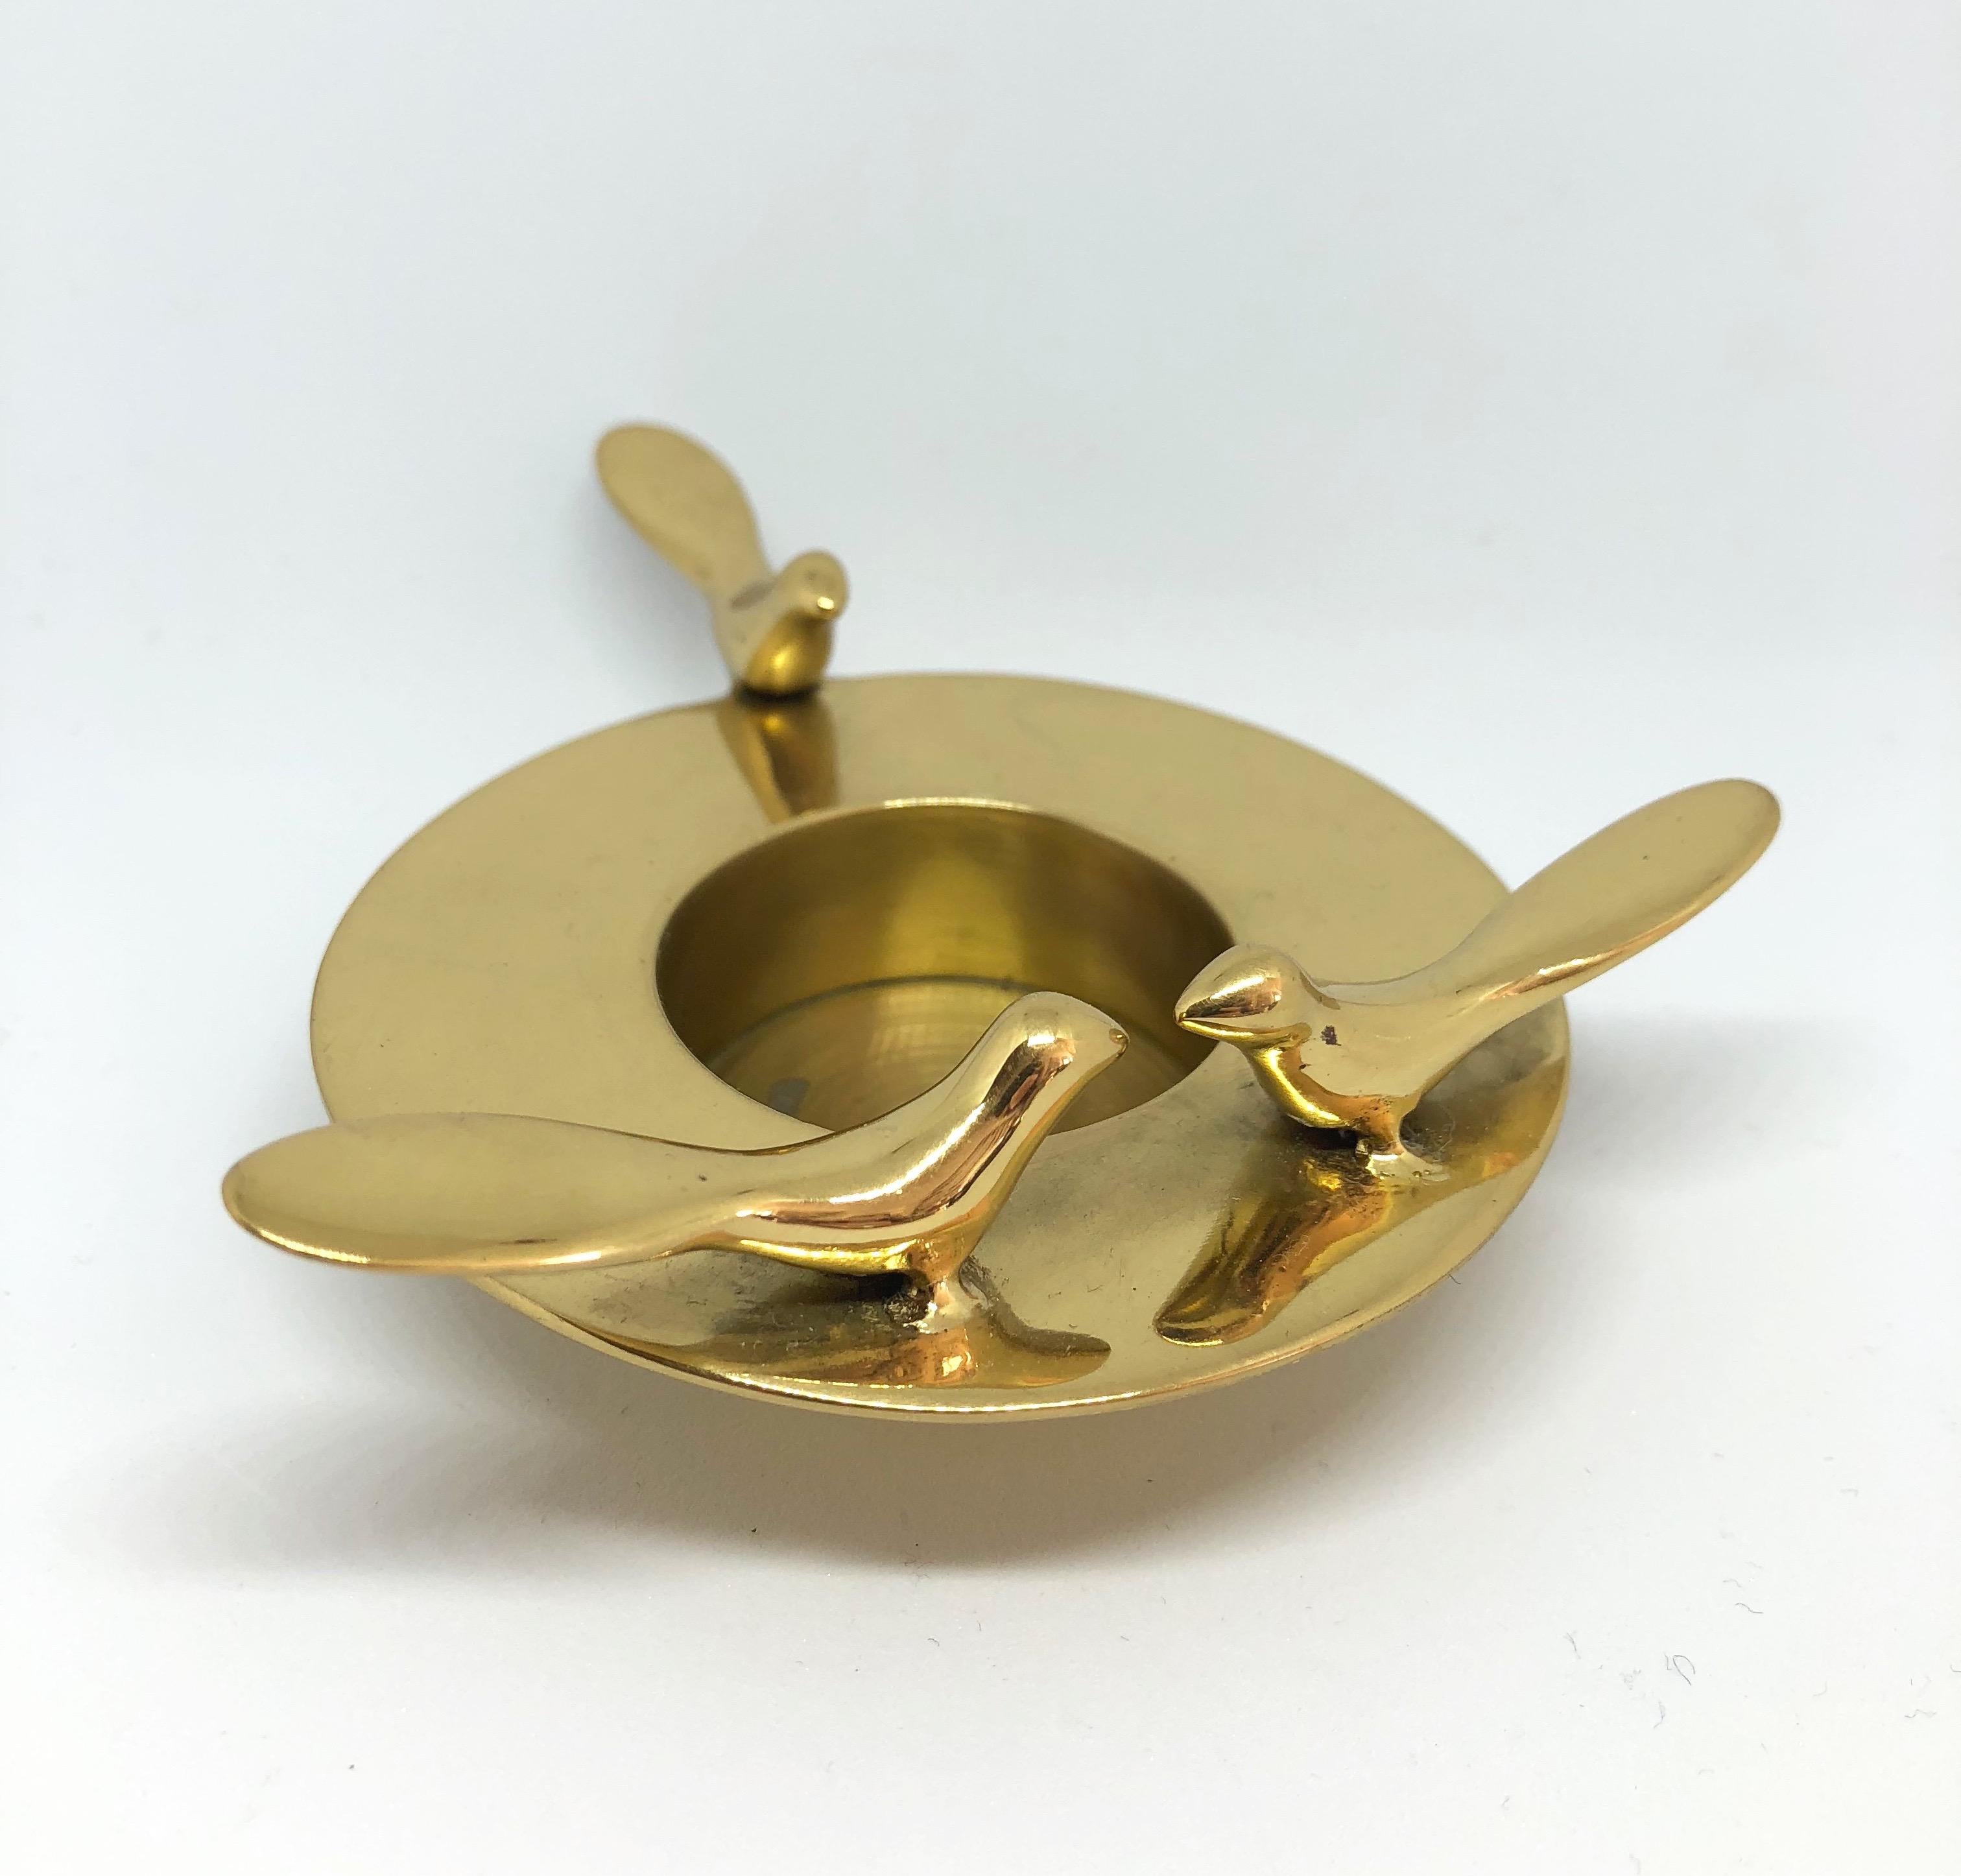 Polished Handmade Cast Brass T-Light Candle-holder with Three Birds For Sale